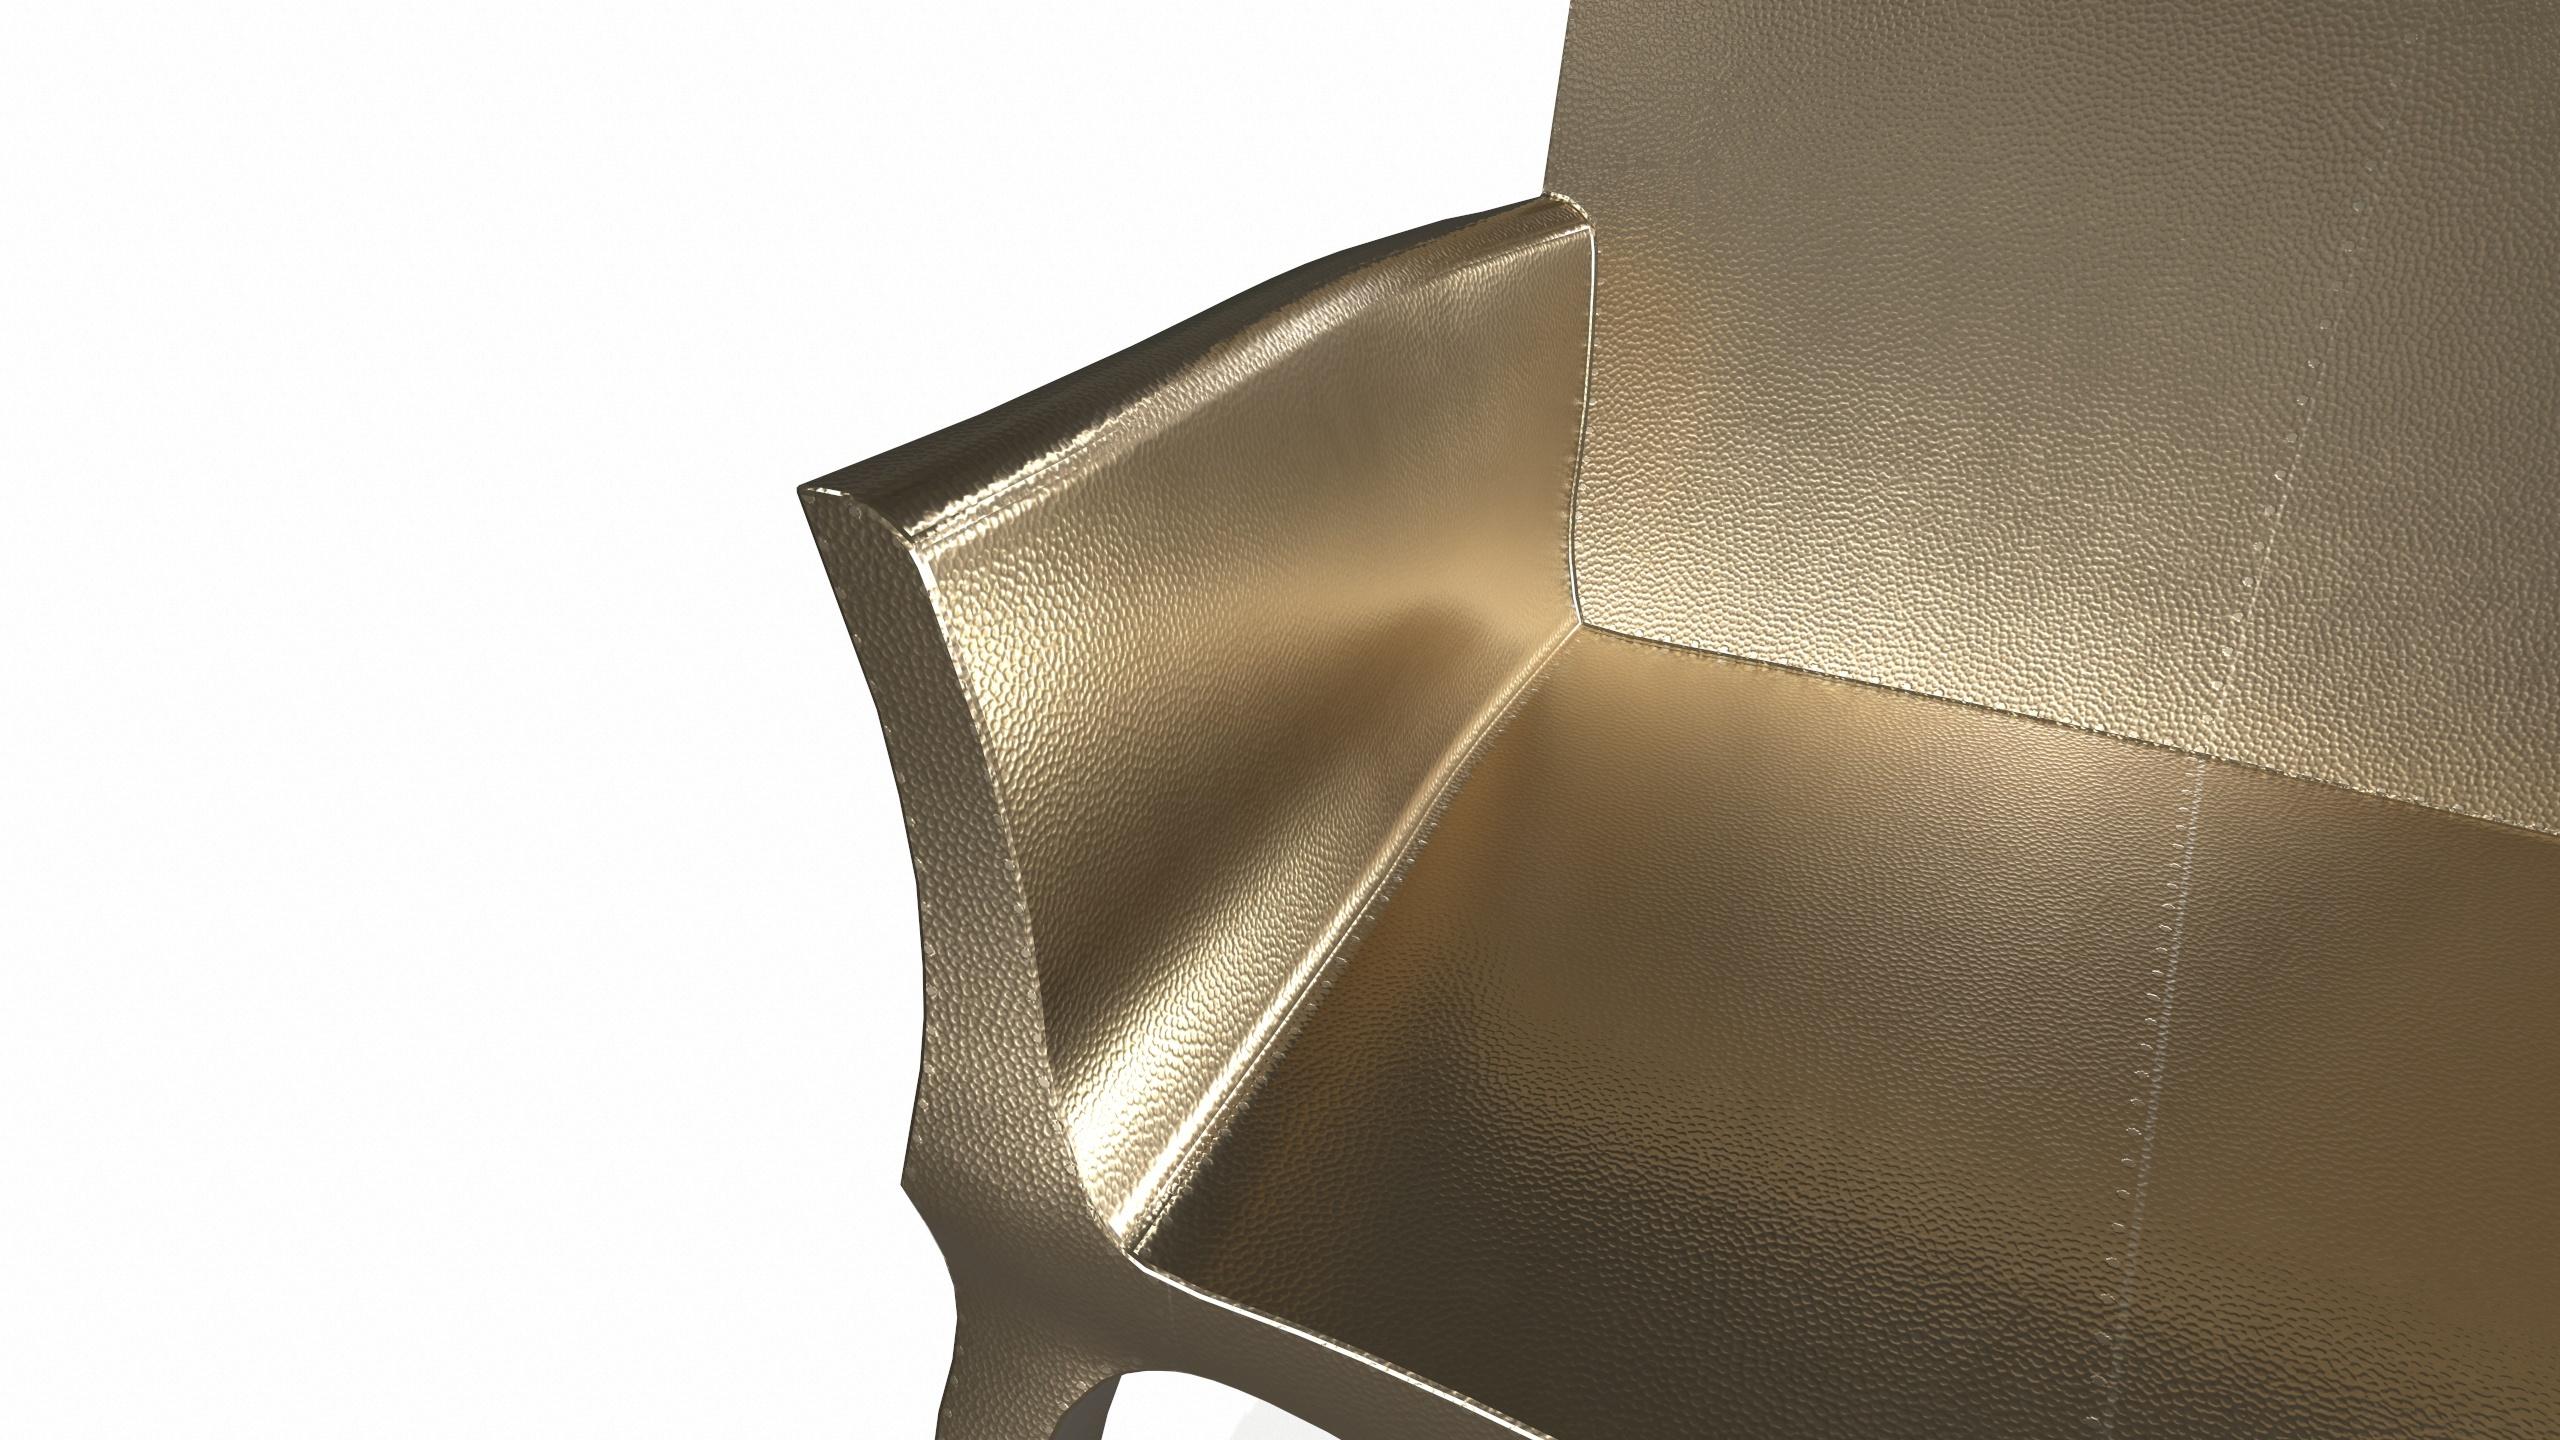 Other Louise Settee Art Deco Lounge Chairs in Mid. Hammered Brass by Paul Mathieu For Sale